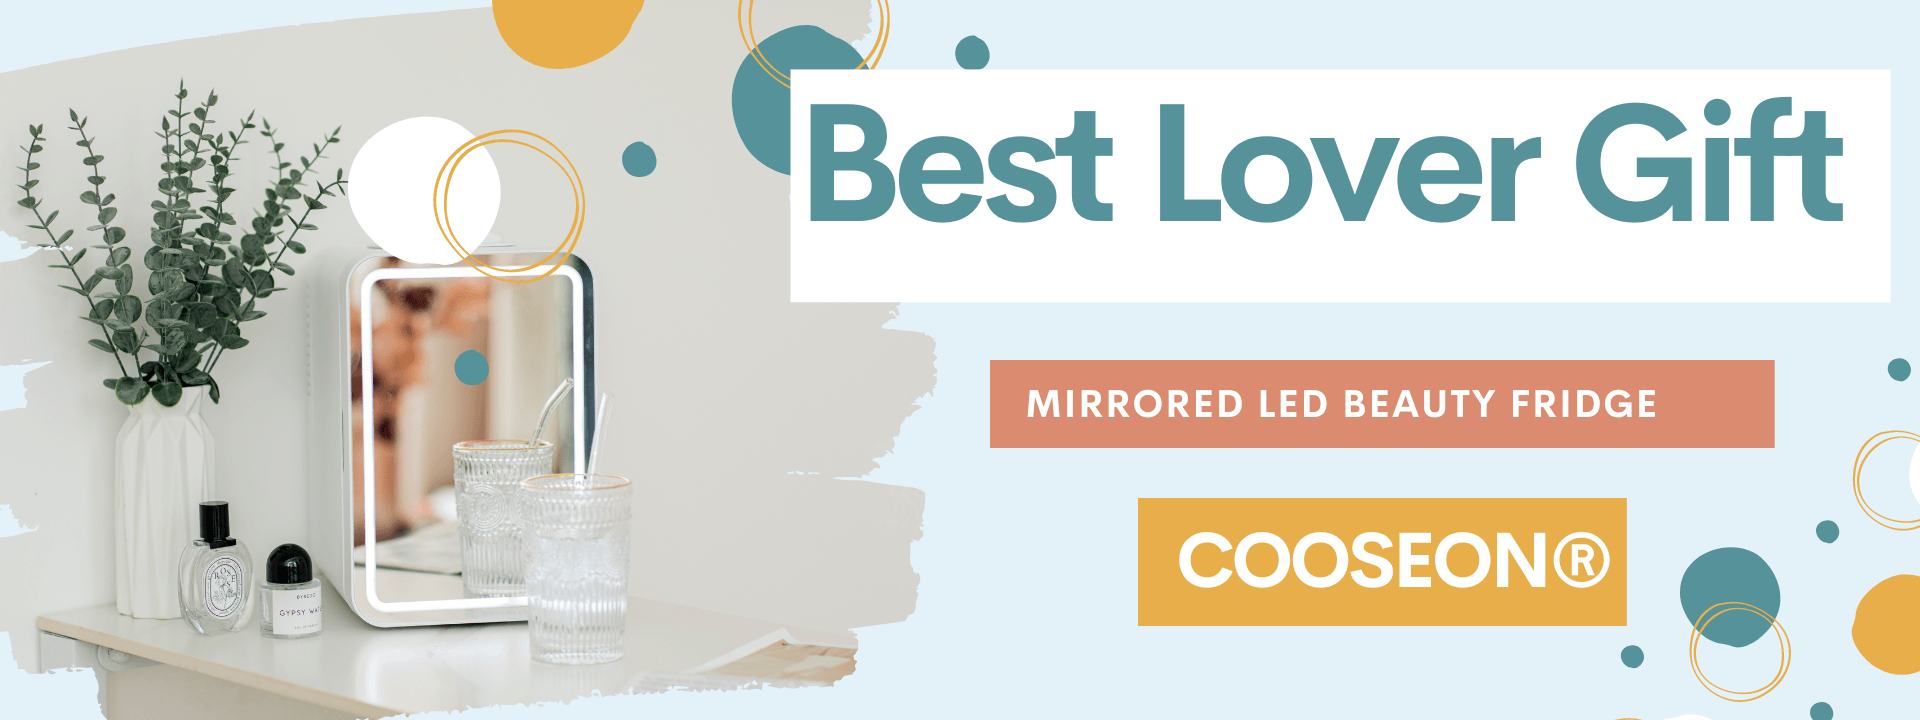 Best Lover Gift - COOSEON Mirrored Led Beauty Fridge - 1st Mini Skincare Fridges With LED Mirror | COOSEON®